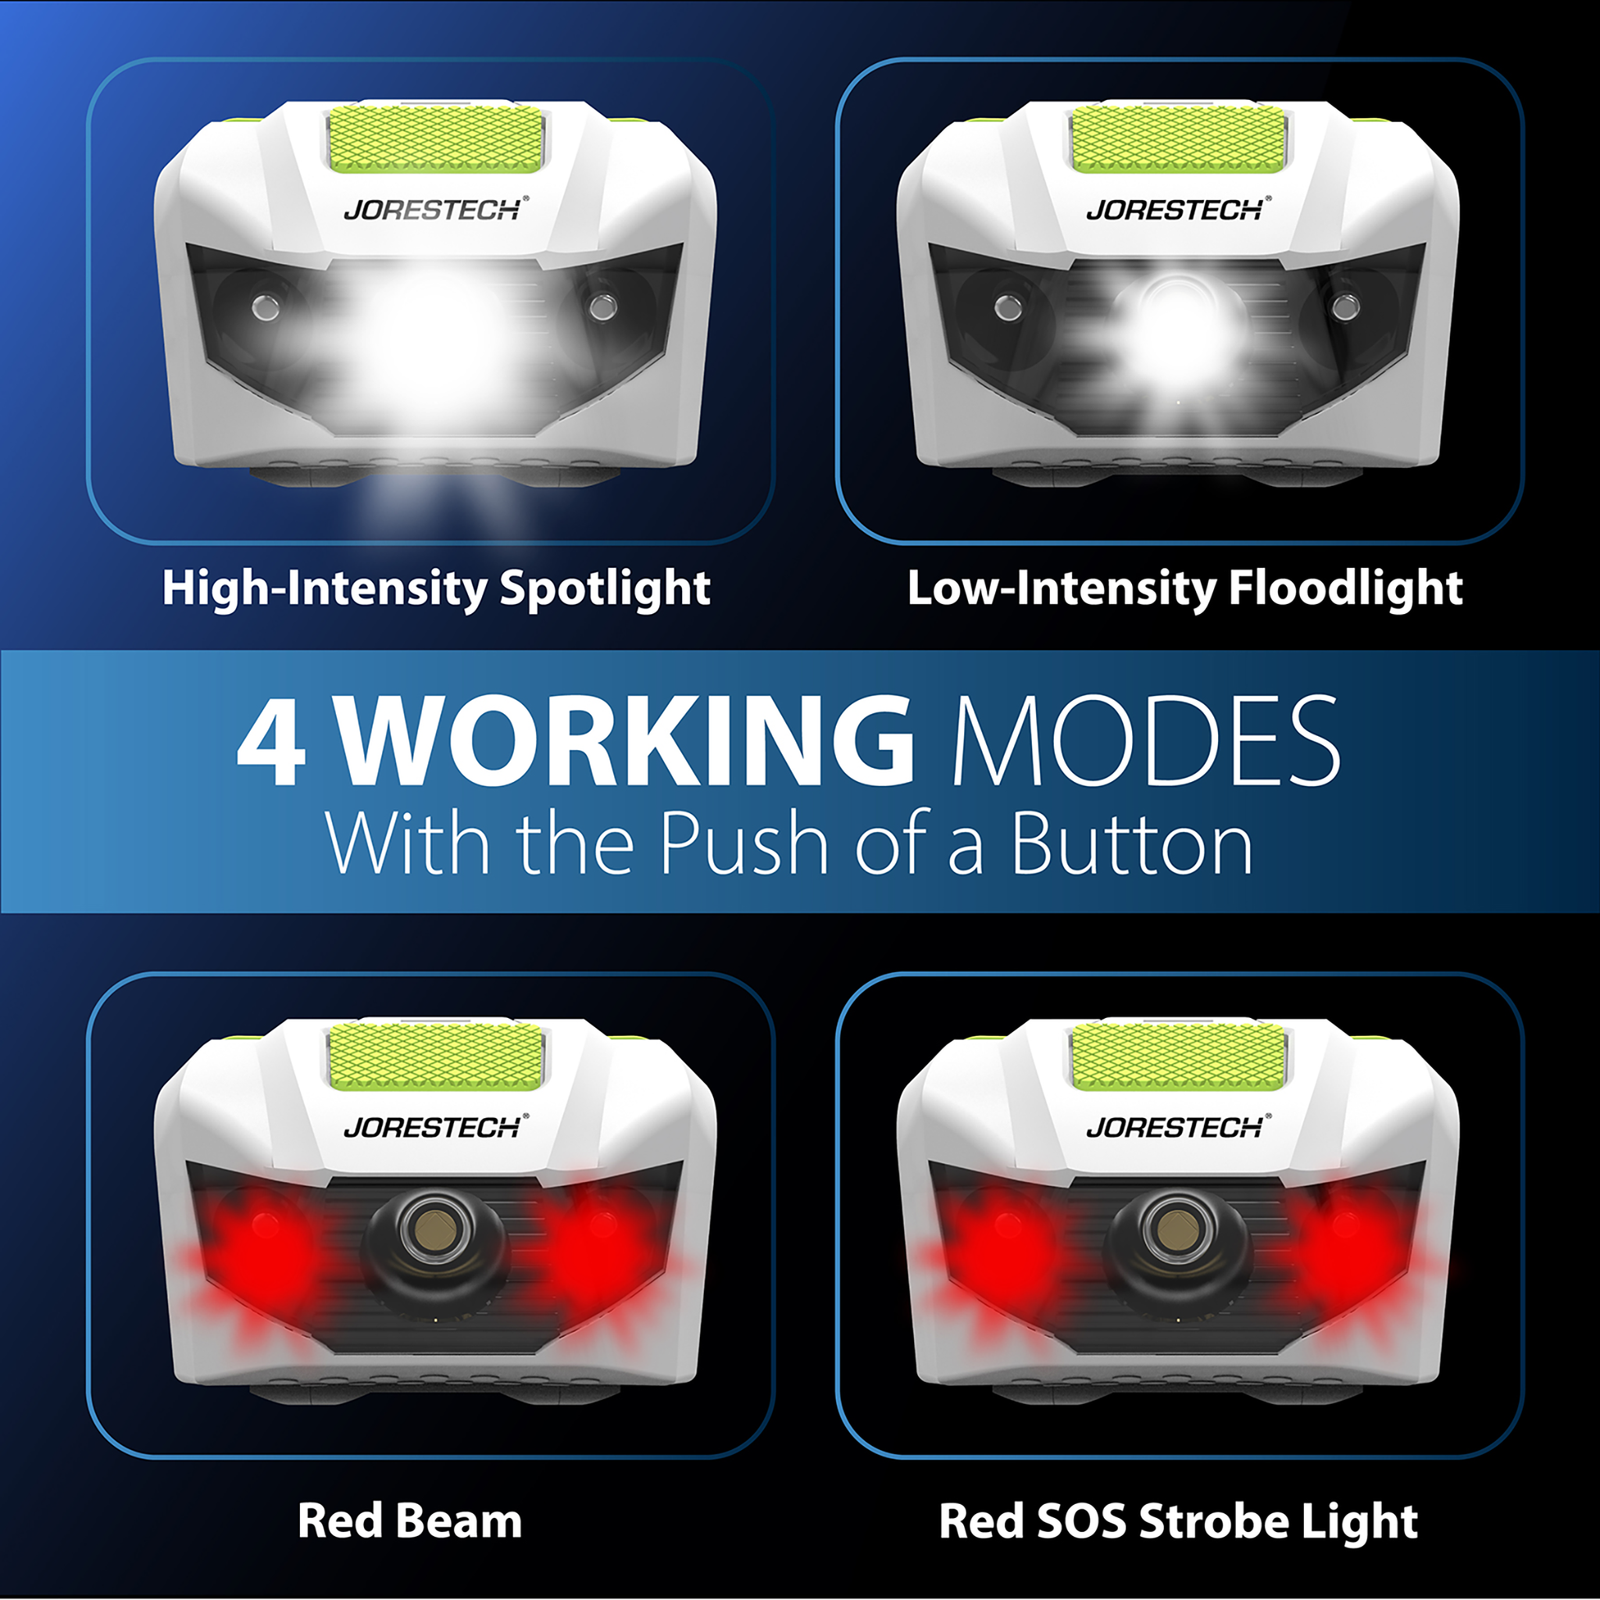 Shows 4 different modes that the JORESTECH lamp has: High intensity spotlight, Low intensity floodlight, red beam and red SOS stroke light